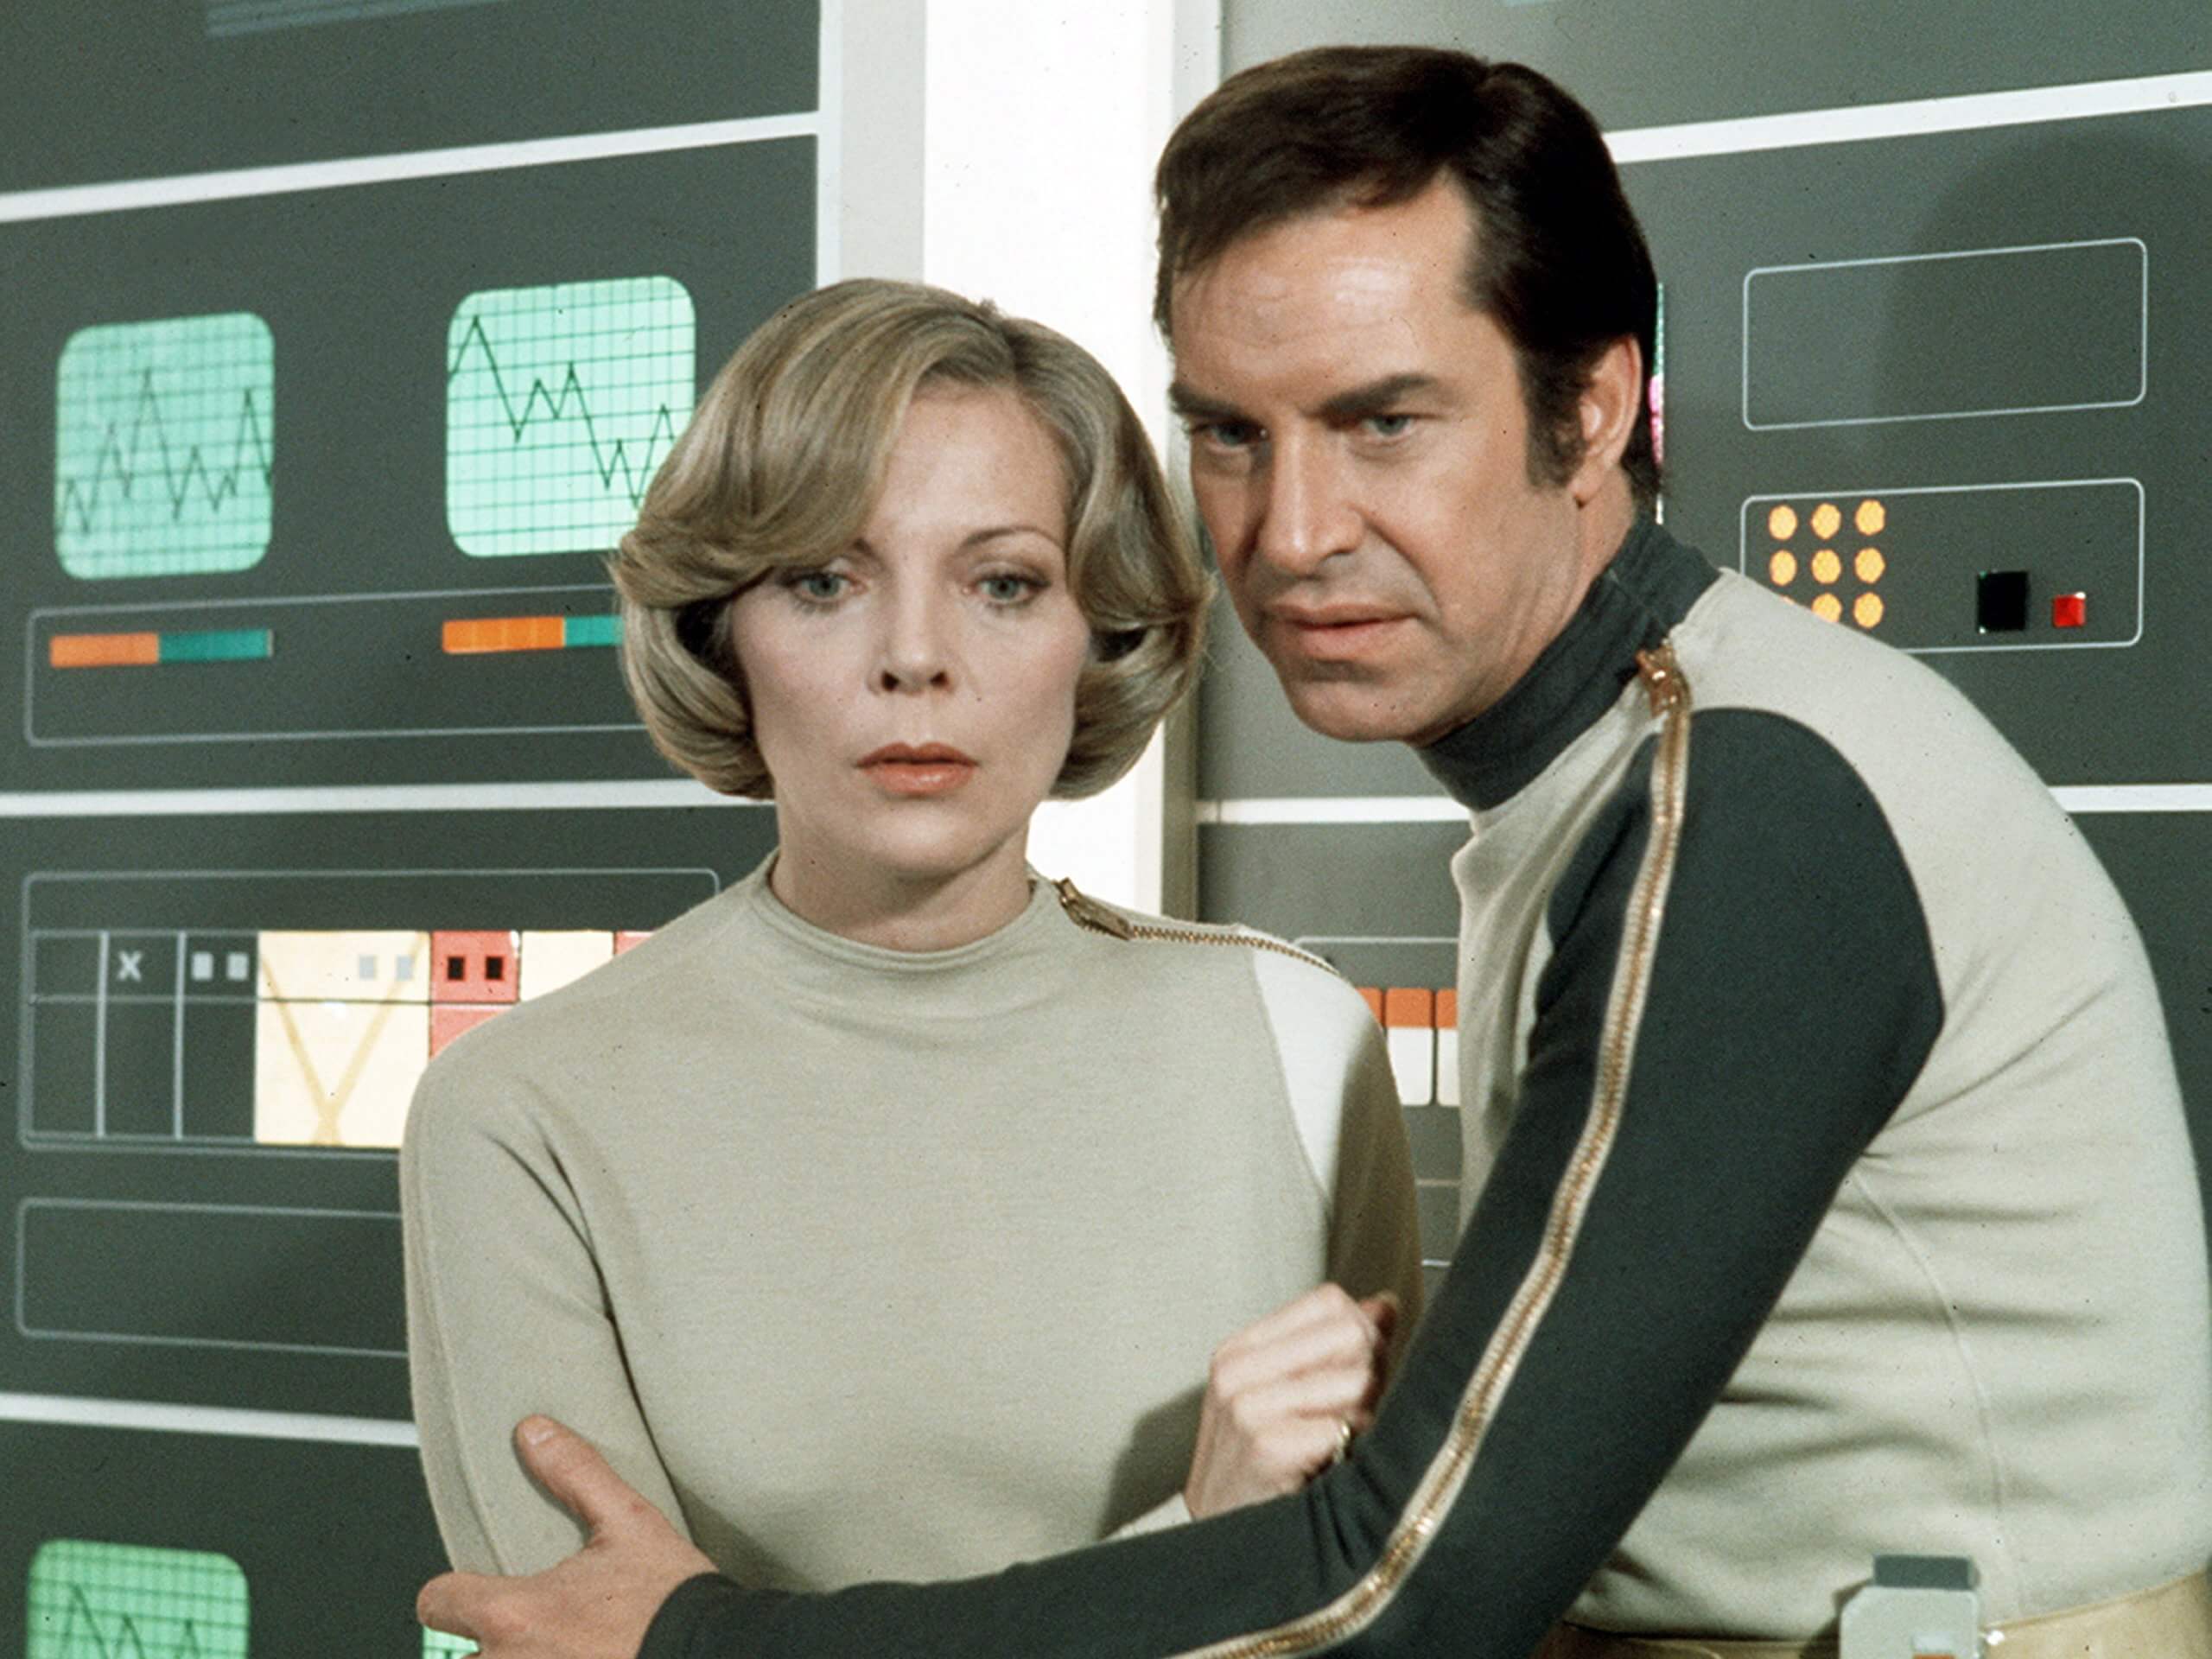 space 1999